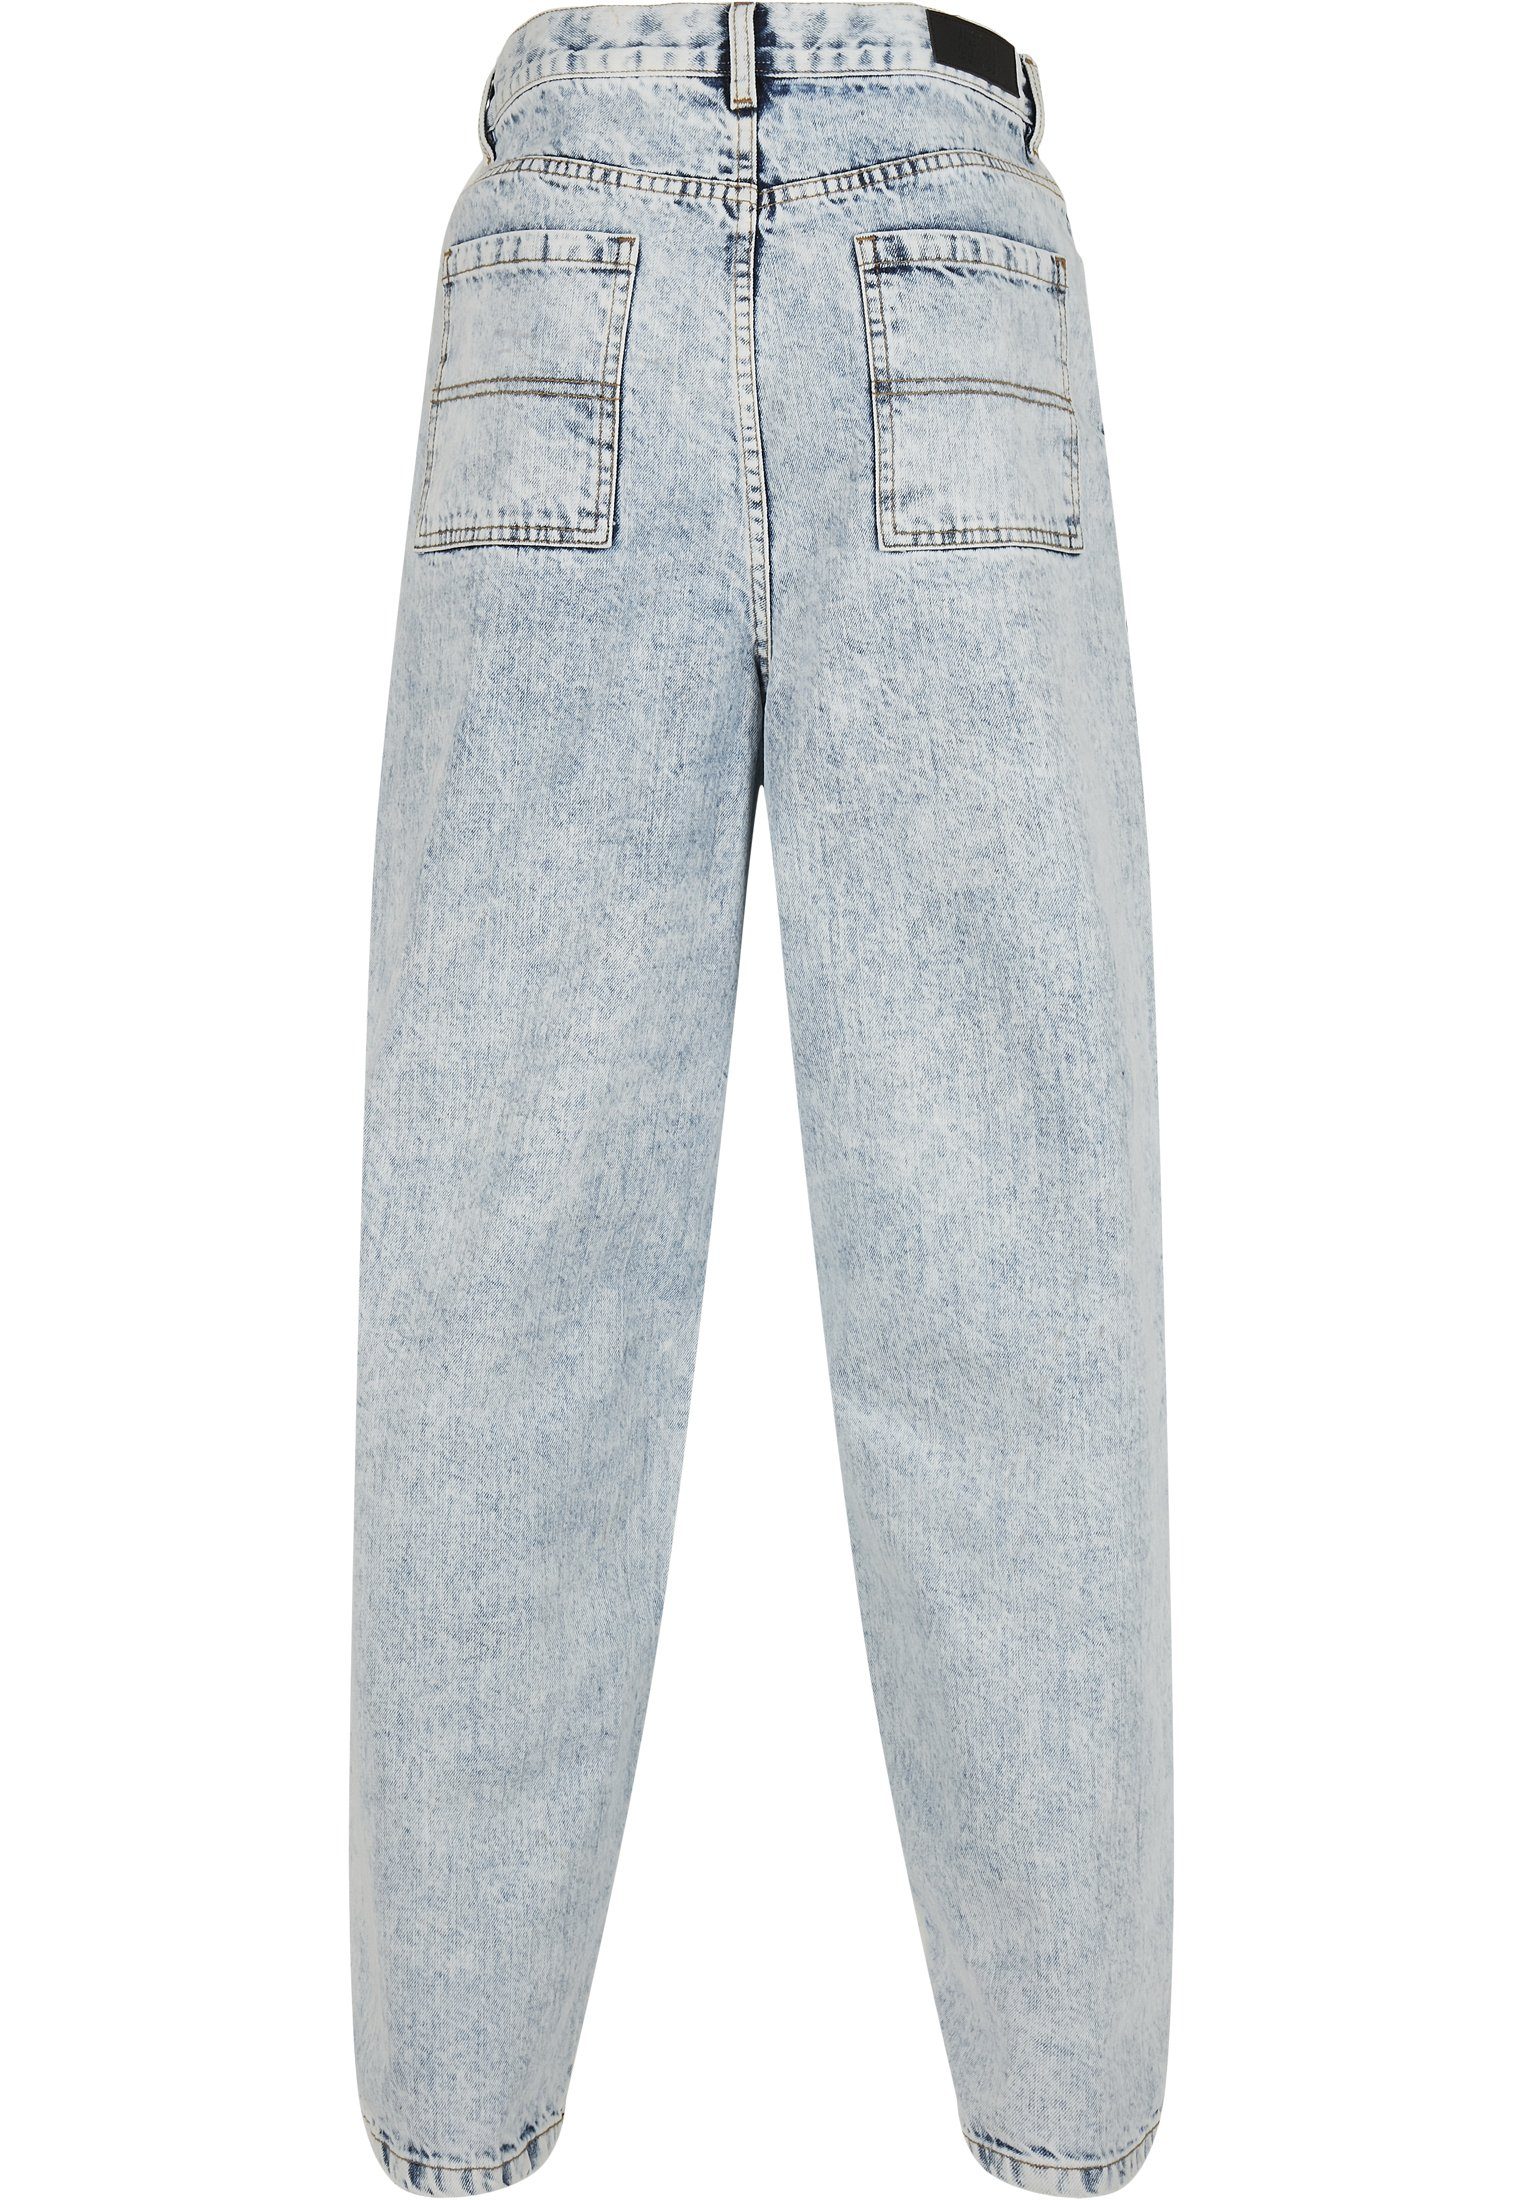 ighter CLASSICS washed Jeans Herren (1-tlg) URBAN 90‘s Jeans Bequeme